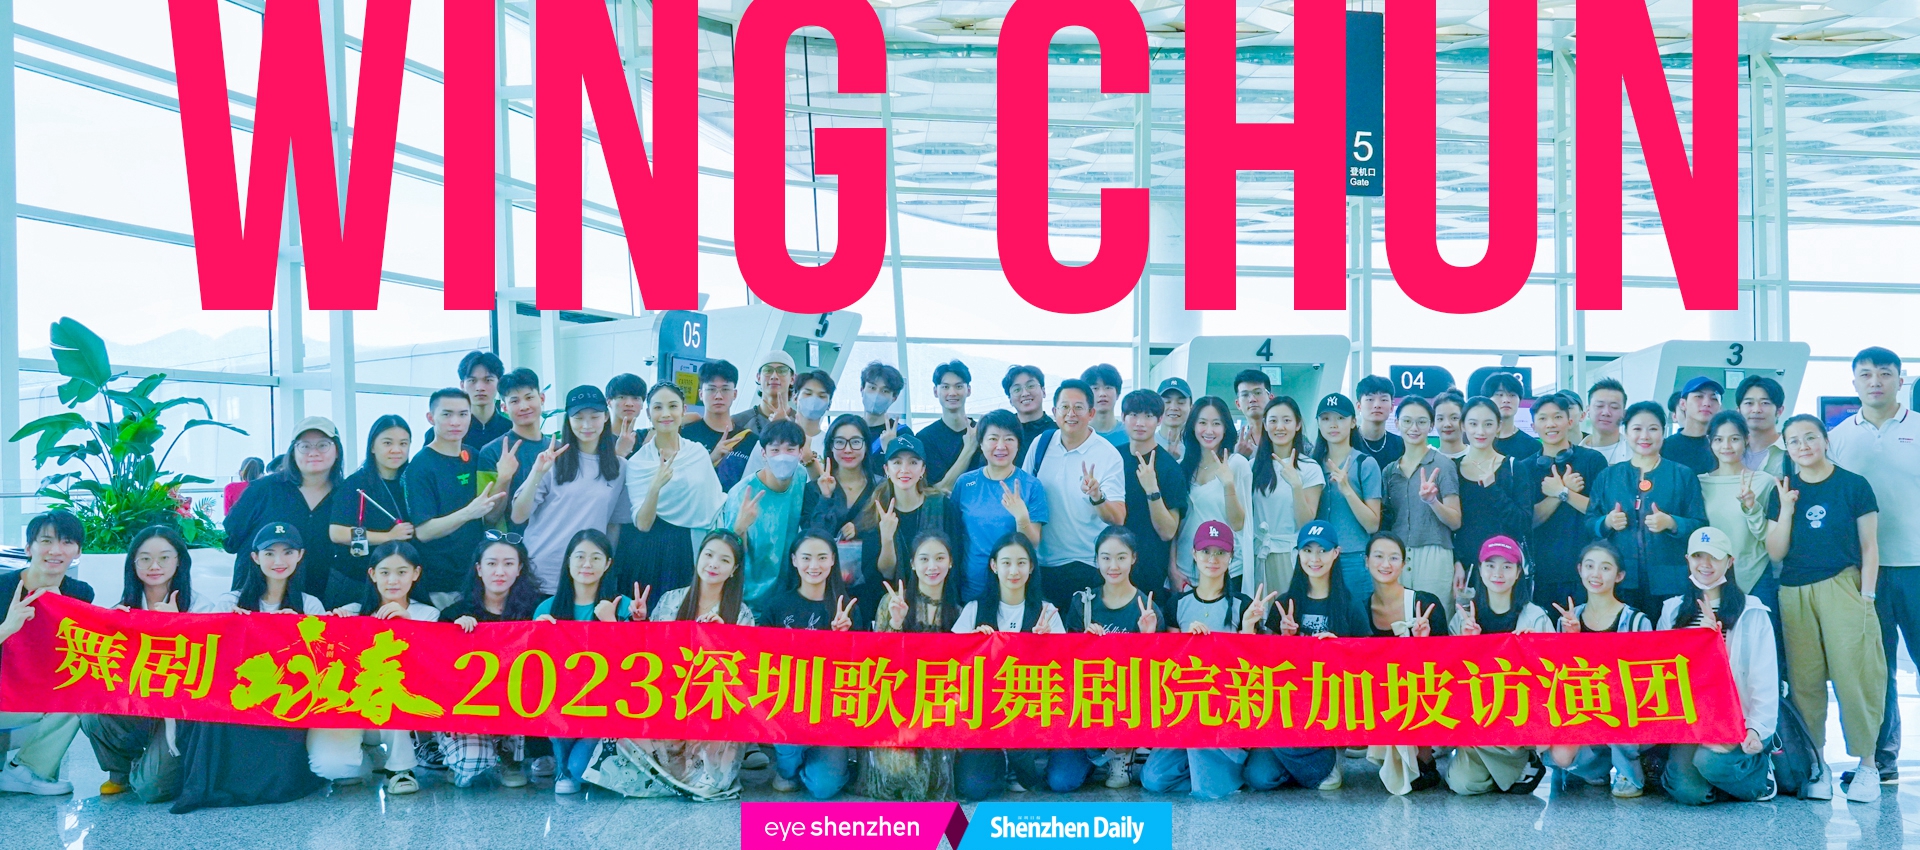 'Wing Chun' cast and crew members leave for Singapore